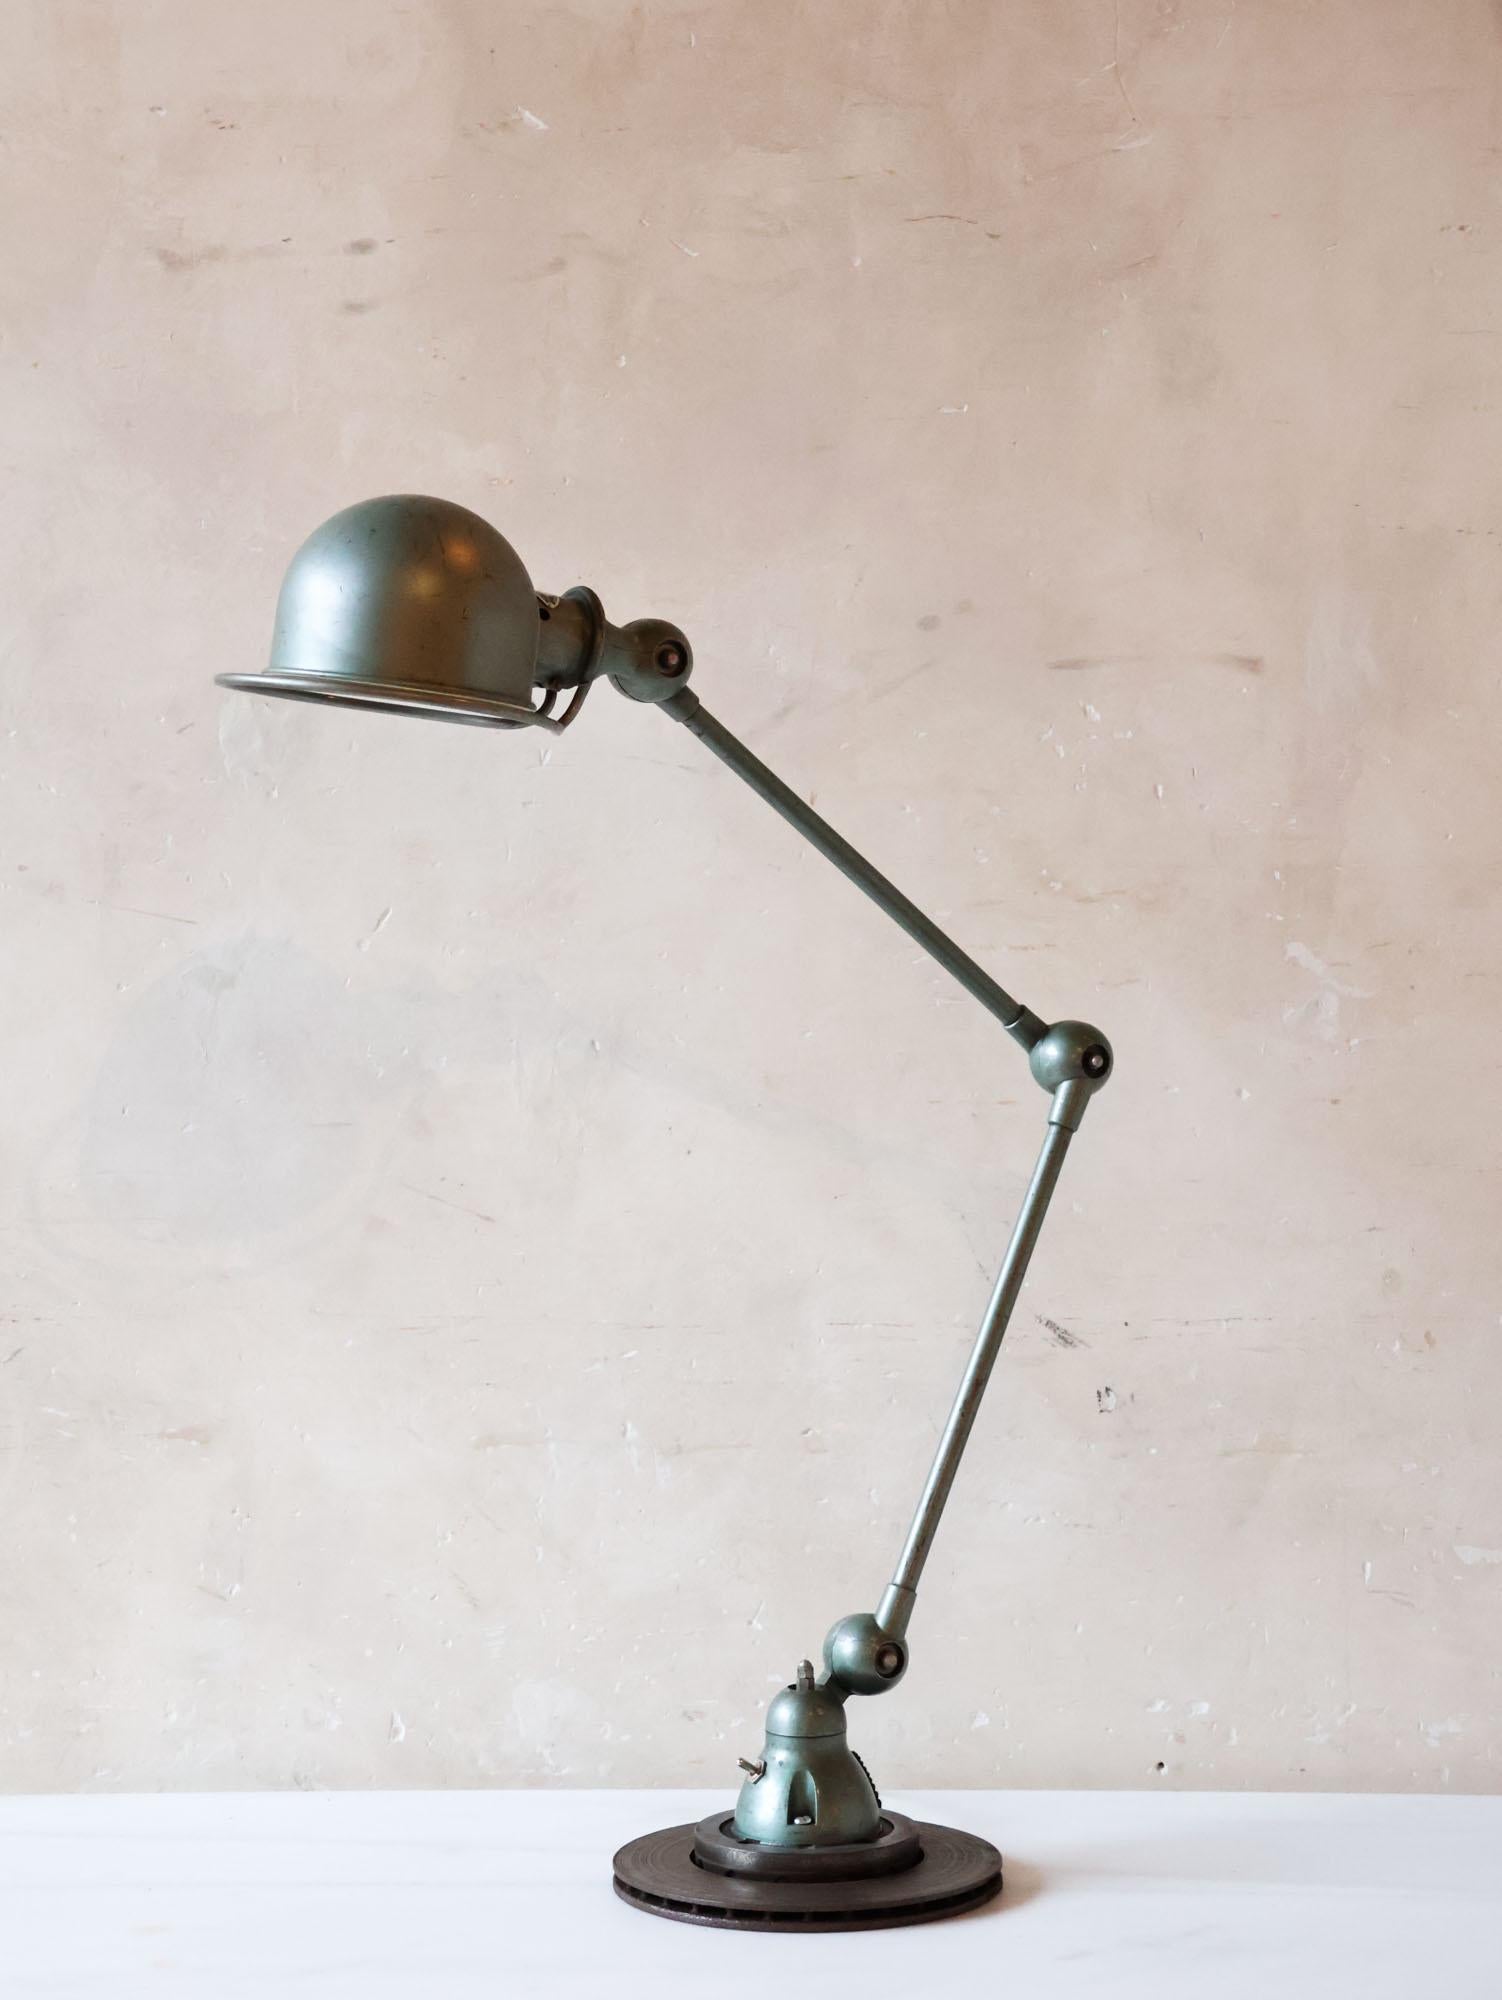 Industrial French vintage table lamp from the renowned brand Jielde, complete with a maker's stamp. Established in 1950 by Jean Louis Domecq, Jielde is celebrated for its finely crafted industrial lamps. Handmade near Lyon, each Jielde lamp exudes